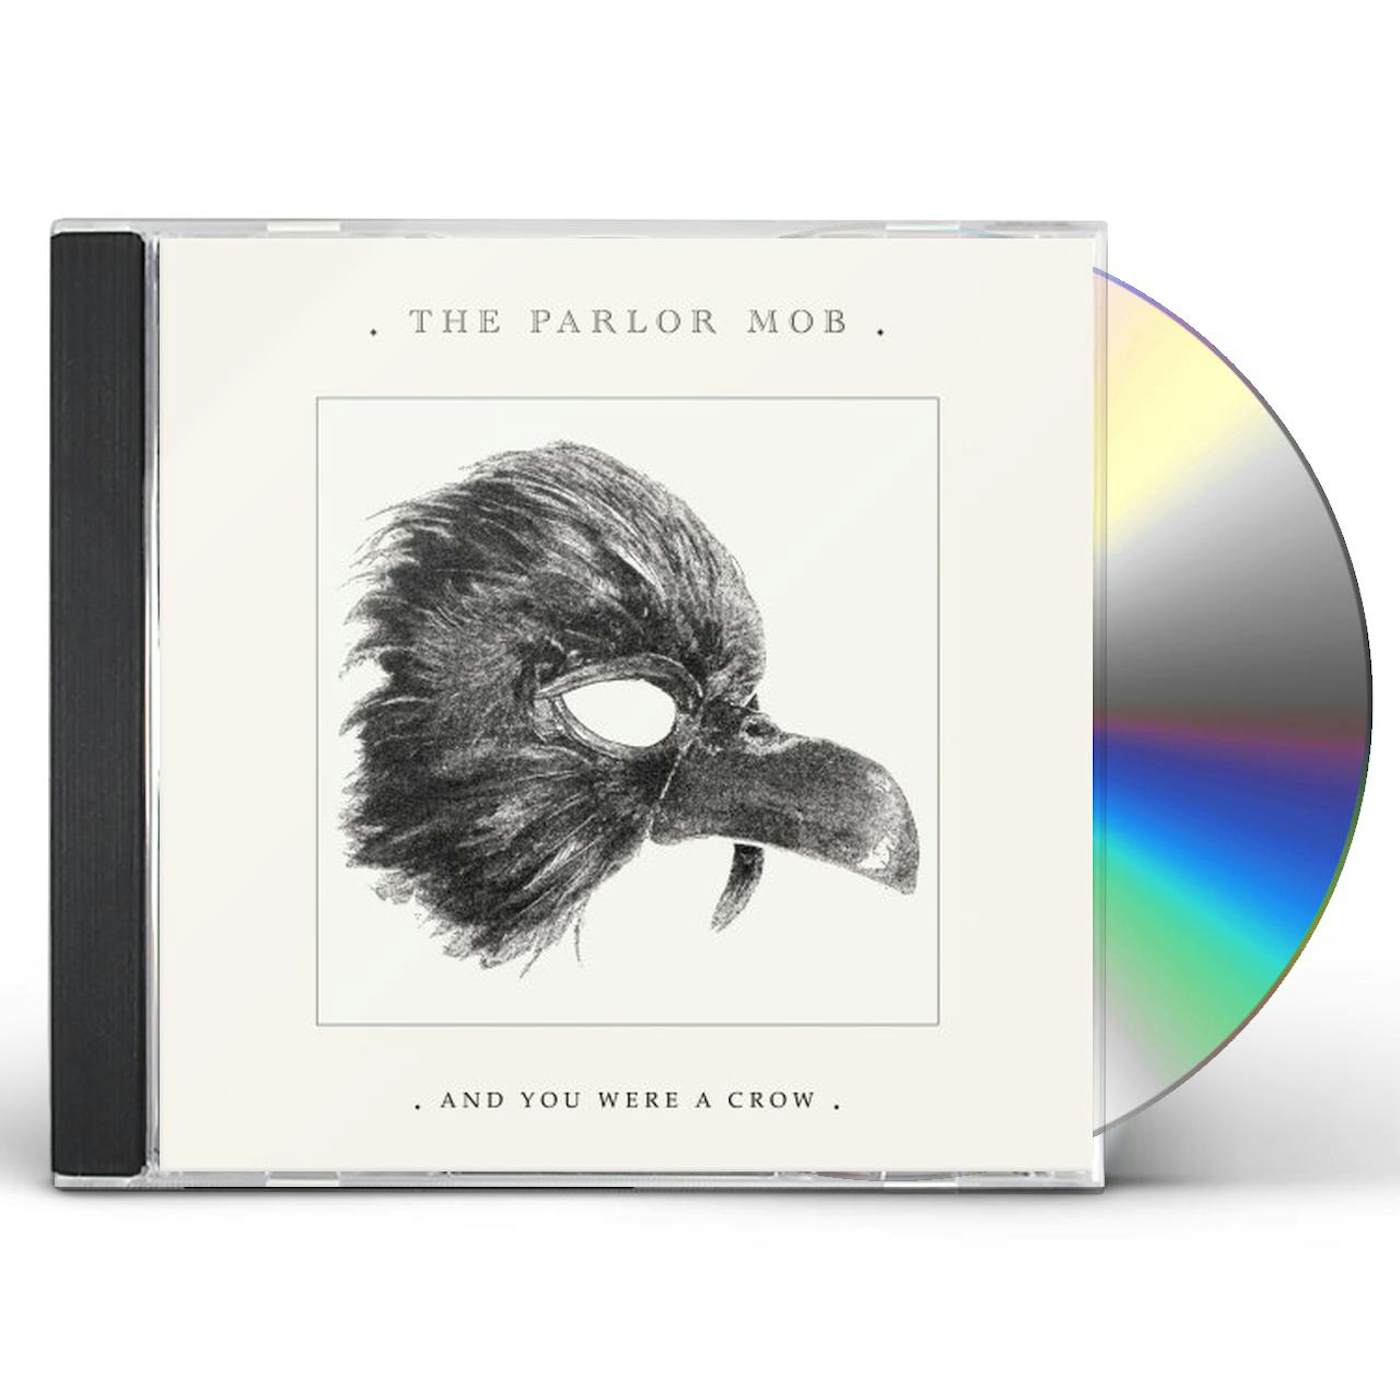 The Parlor Mob & YOU WERE A CROW CD